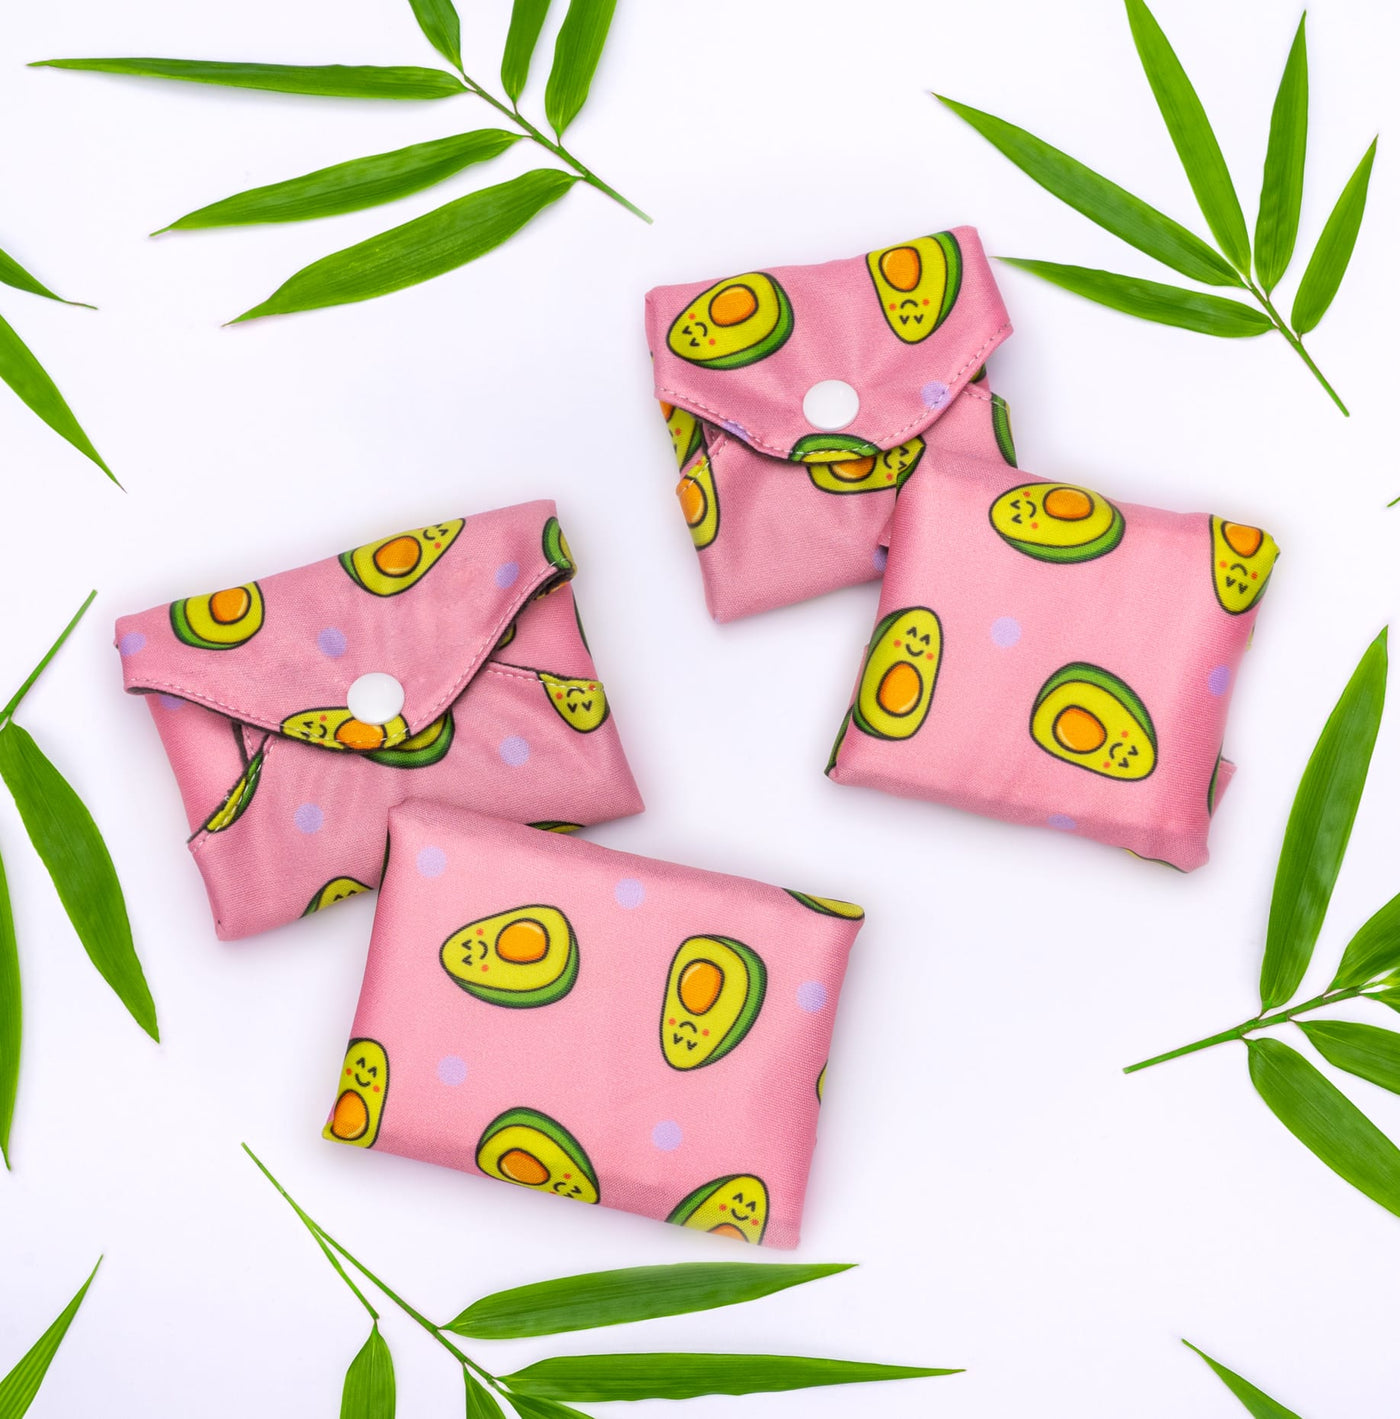 LillyPads™ Reusable Menstrual Pads Limited Edition